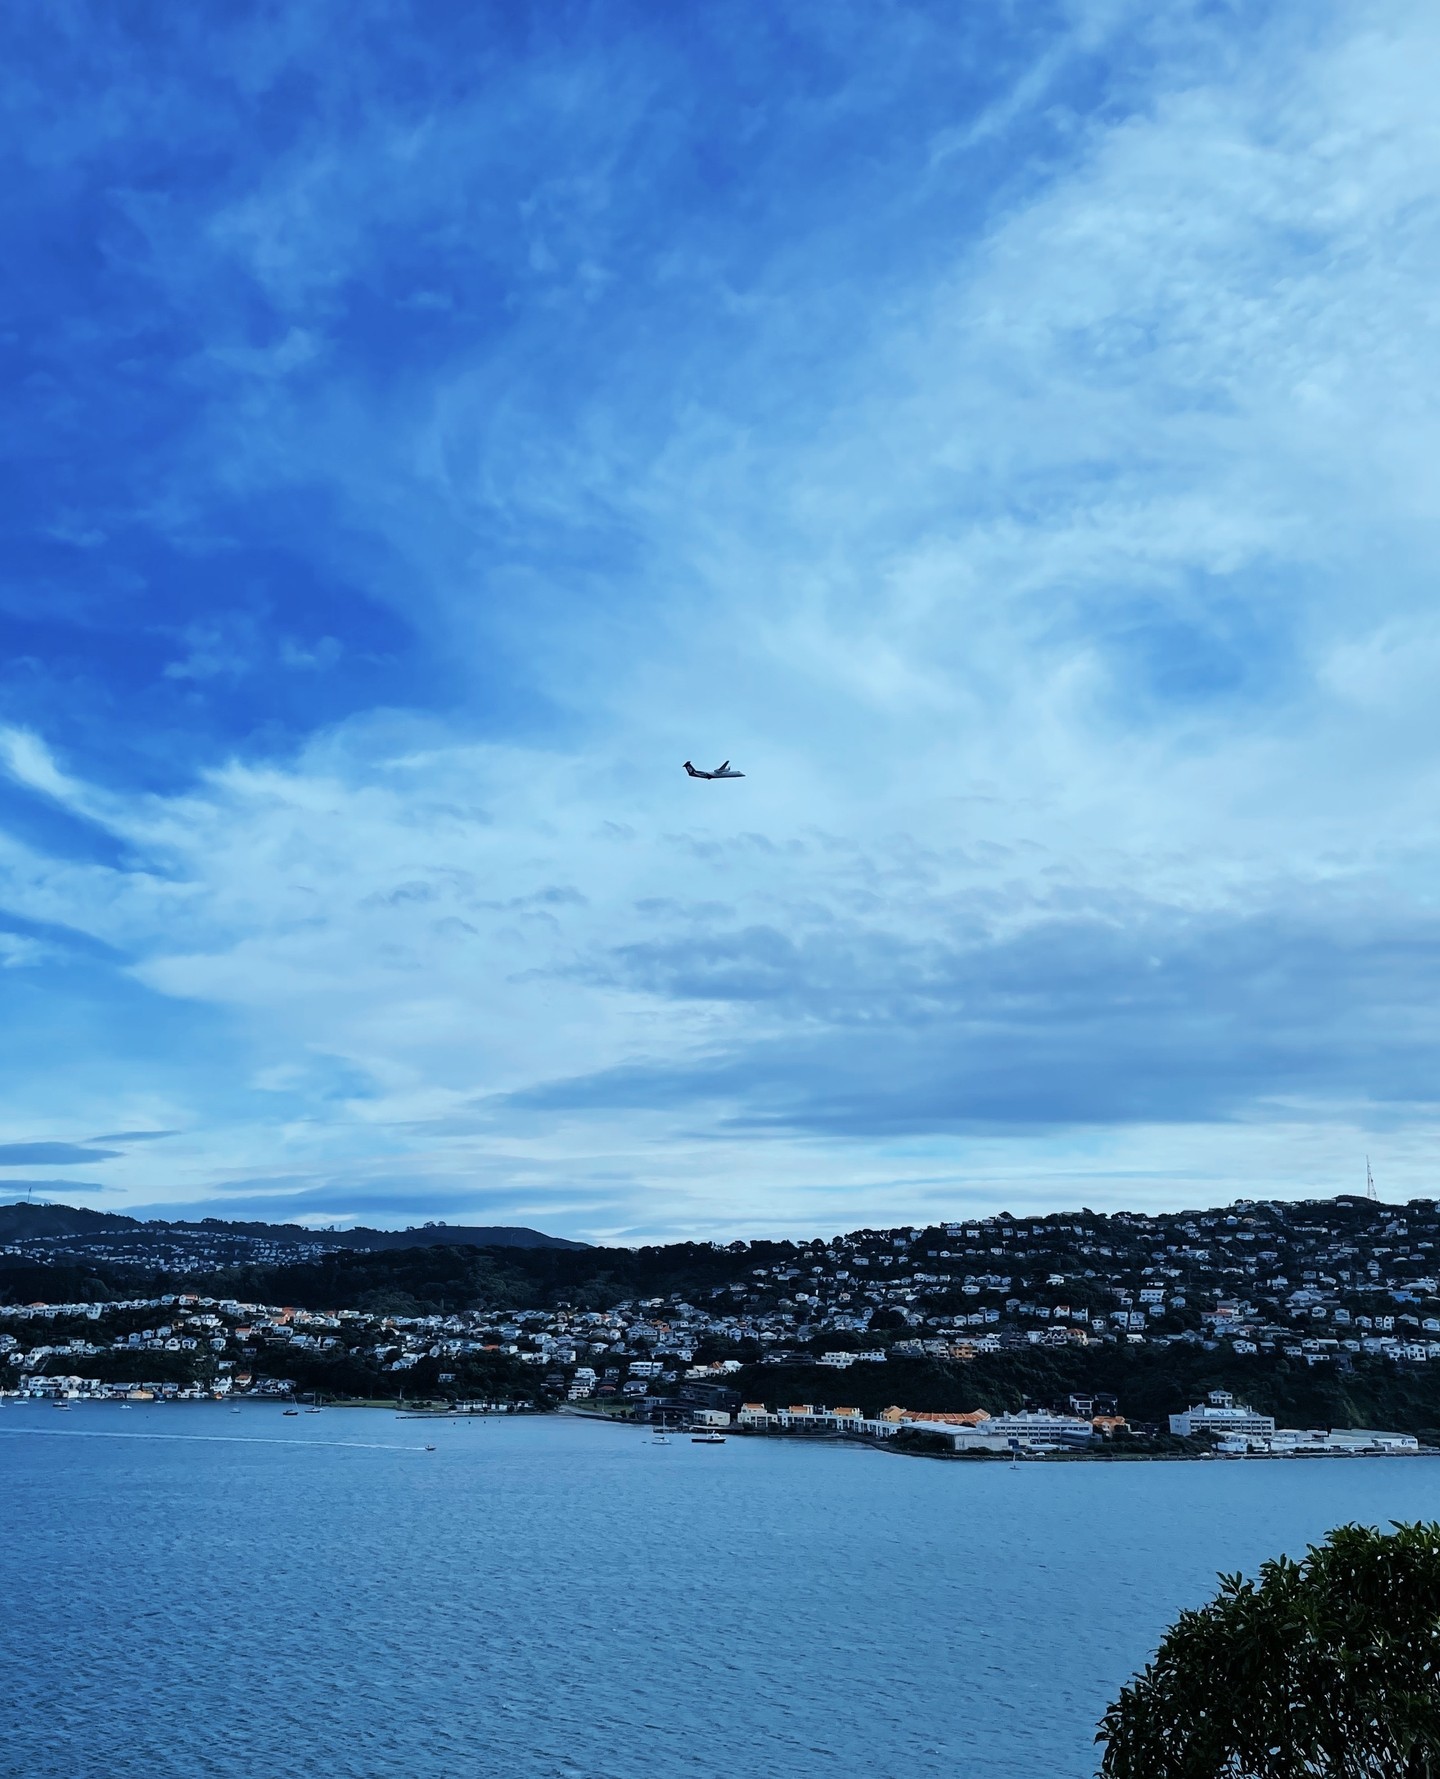 It started with an old saying.⁠
You can't beat Wellington on a good day.⁠
It truly is.⁠
I am so grateful to be living in this beautiful coolest little capital in the world. Big shoutout to my husband.⁠
⁠
I love watching the planes taking on and off. Yeah, I live near the airport. In fact, the airport is just around the corner in this small city 🤔 I love my southern suburbs.⁠
⁠
#thepaperandink #wellingtonlive #WellingtonNZ #OurWellington #TōTātouPōneke #wellymyway